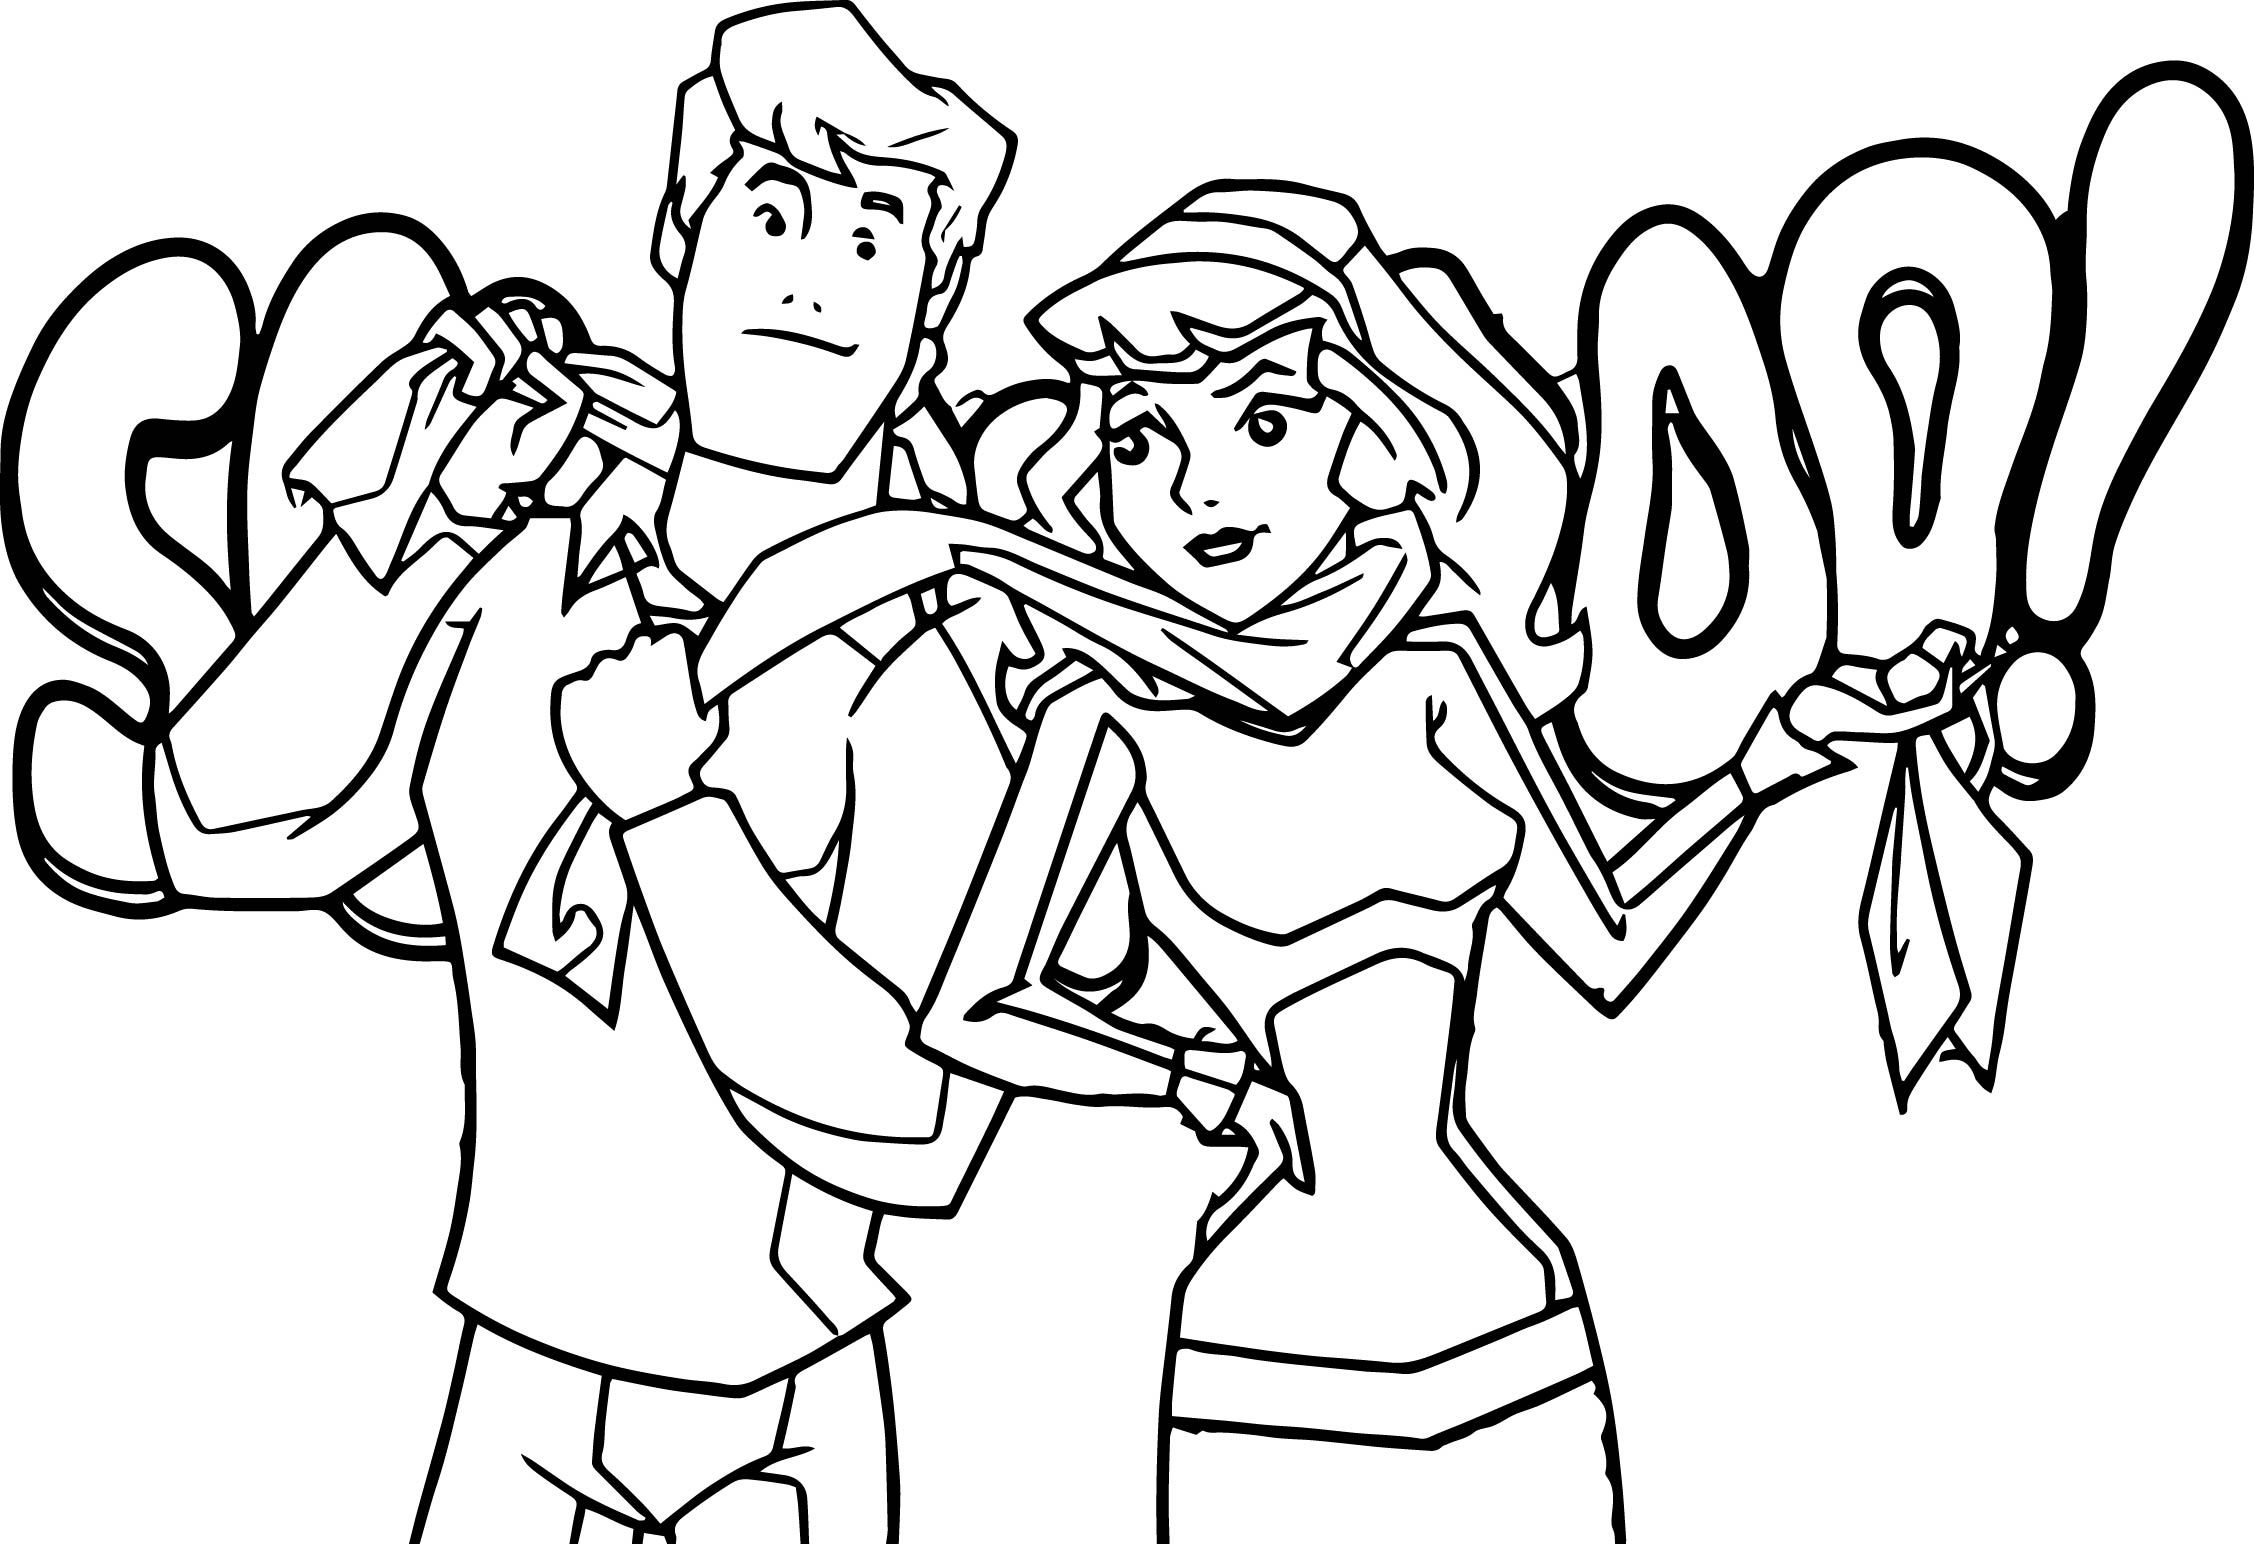 Scooby Doo Daphne Coloring Pages Collection | Scooby doo coloring pages,  Monster coloring pages, Cartoon coloring pages